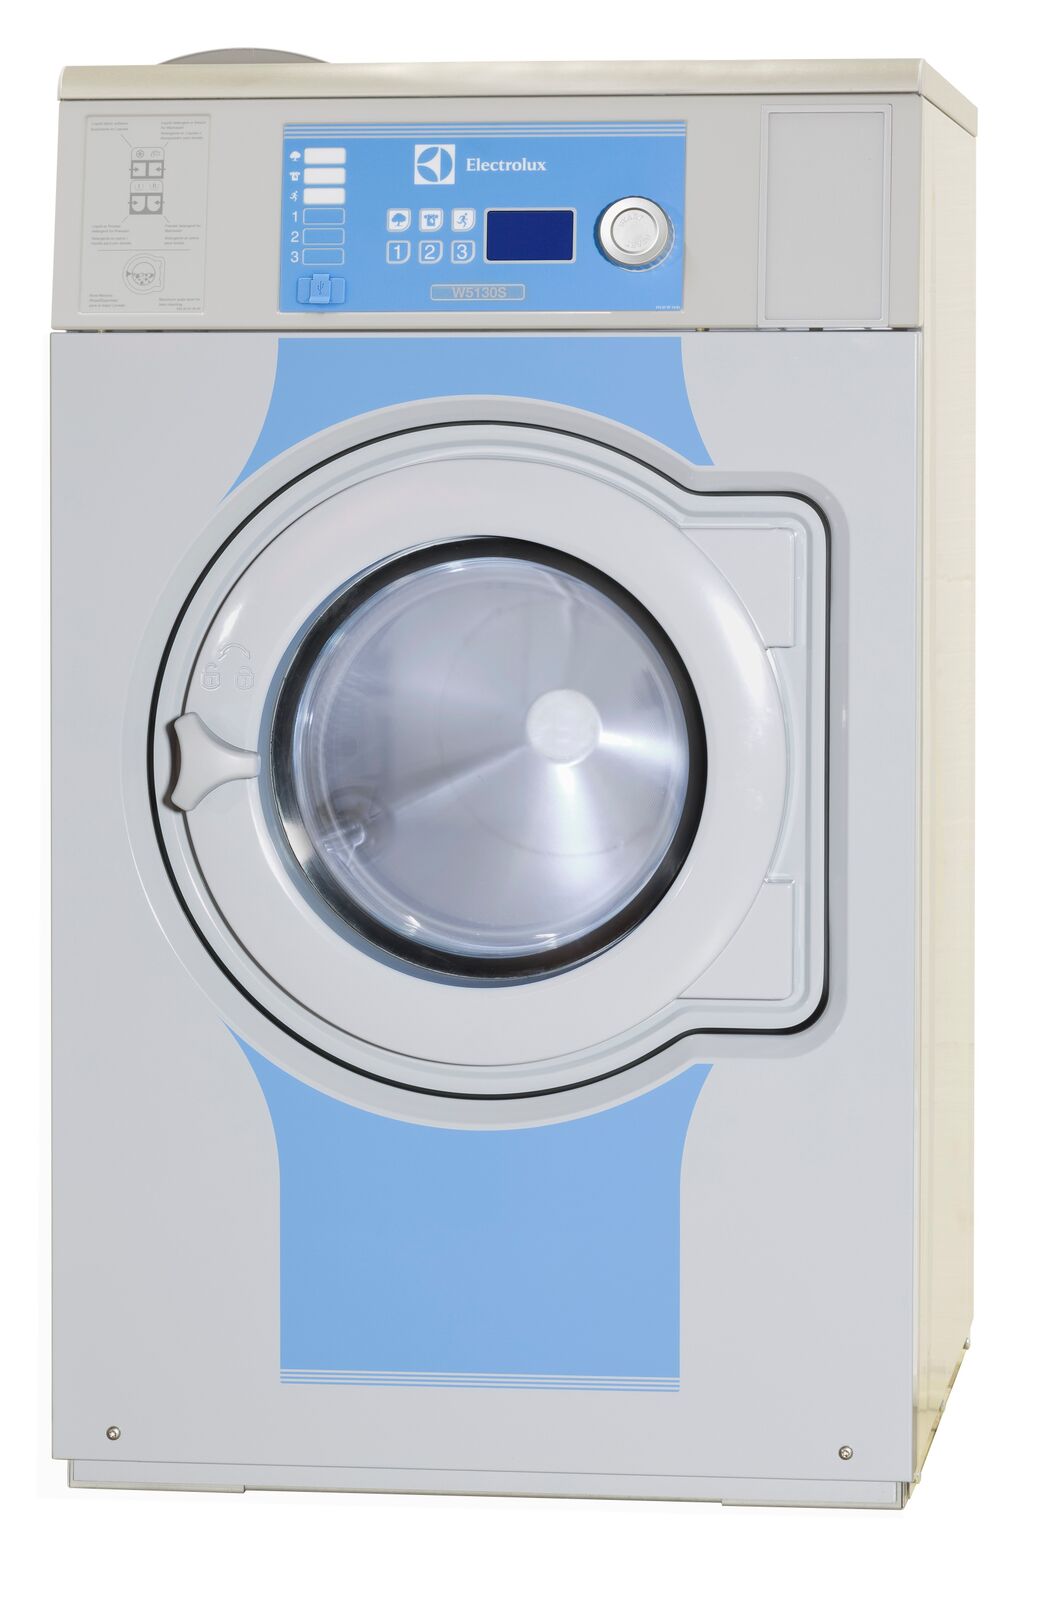 New 2020 Electrolux W5180N - Cardinal Laundry Equipment Co